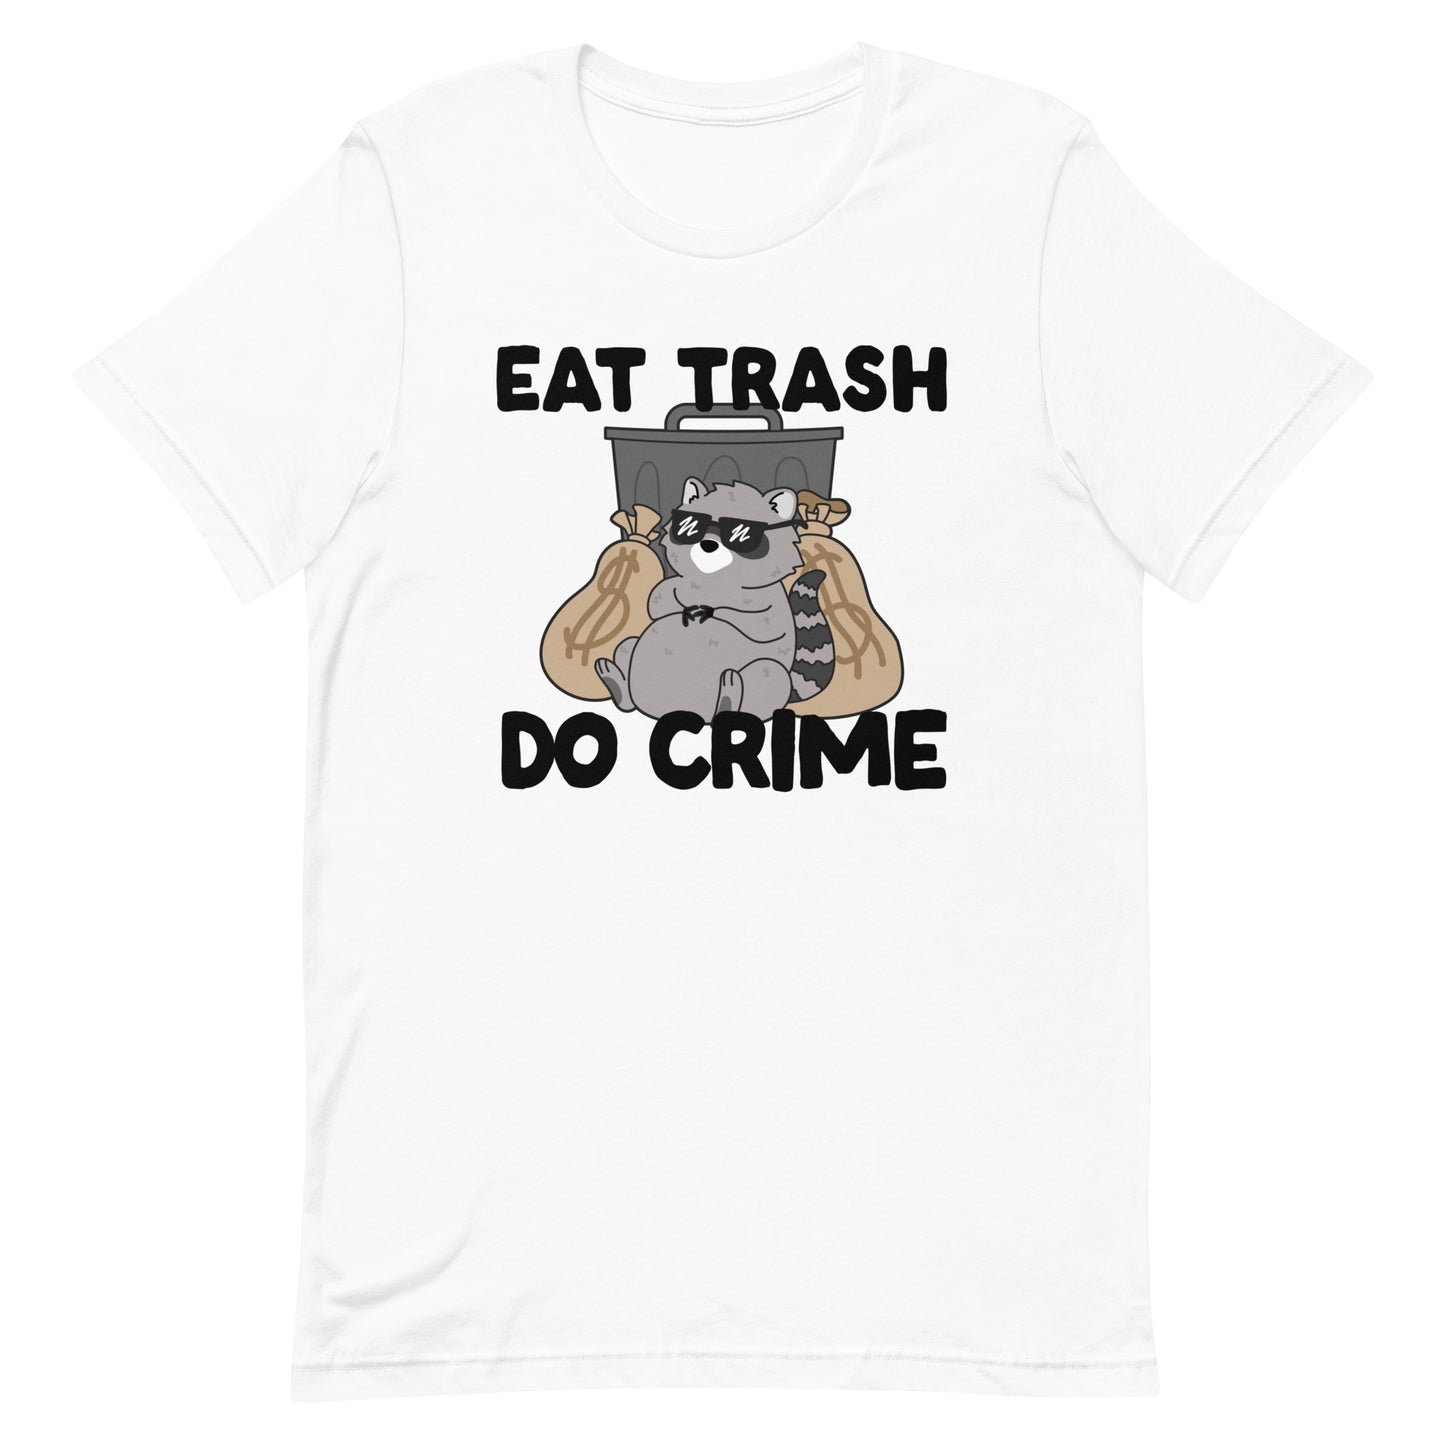 A white crewneck t-shirt featuing an illustration of a chubby raccoon wearing sunglasses. The raccoon is laying back against a trash can and large bags of money. Text surrounding the image reads "Eat trash. Do crime."